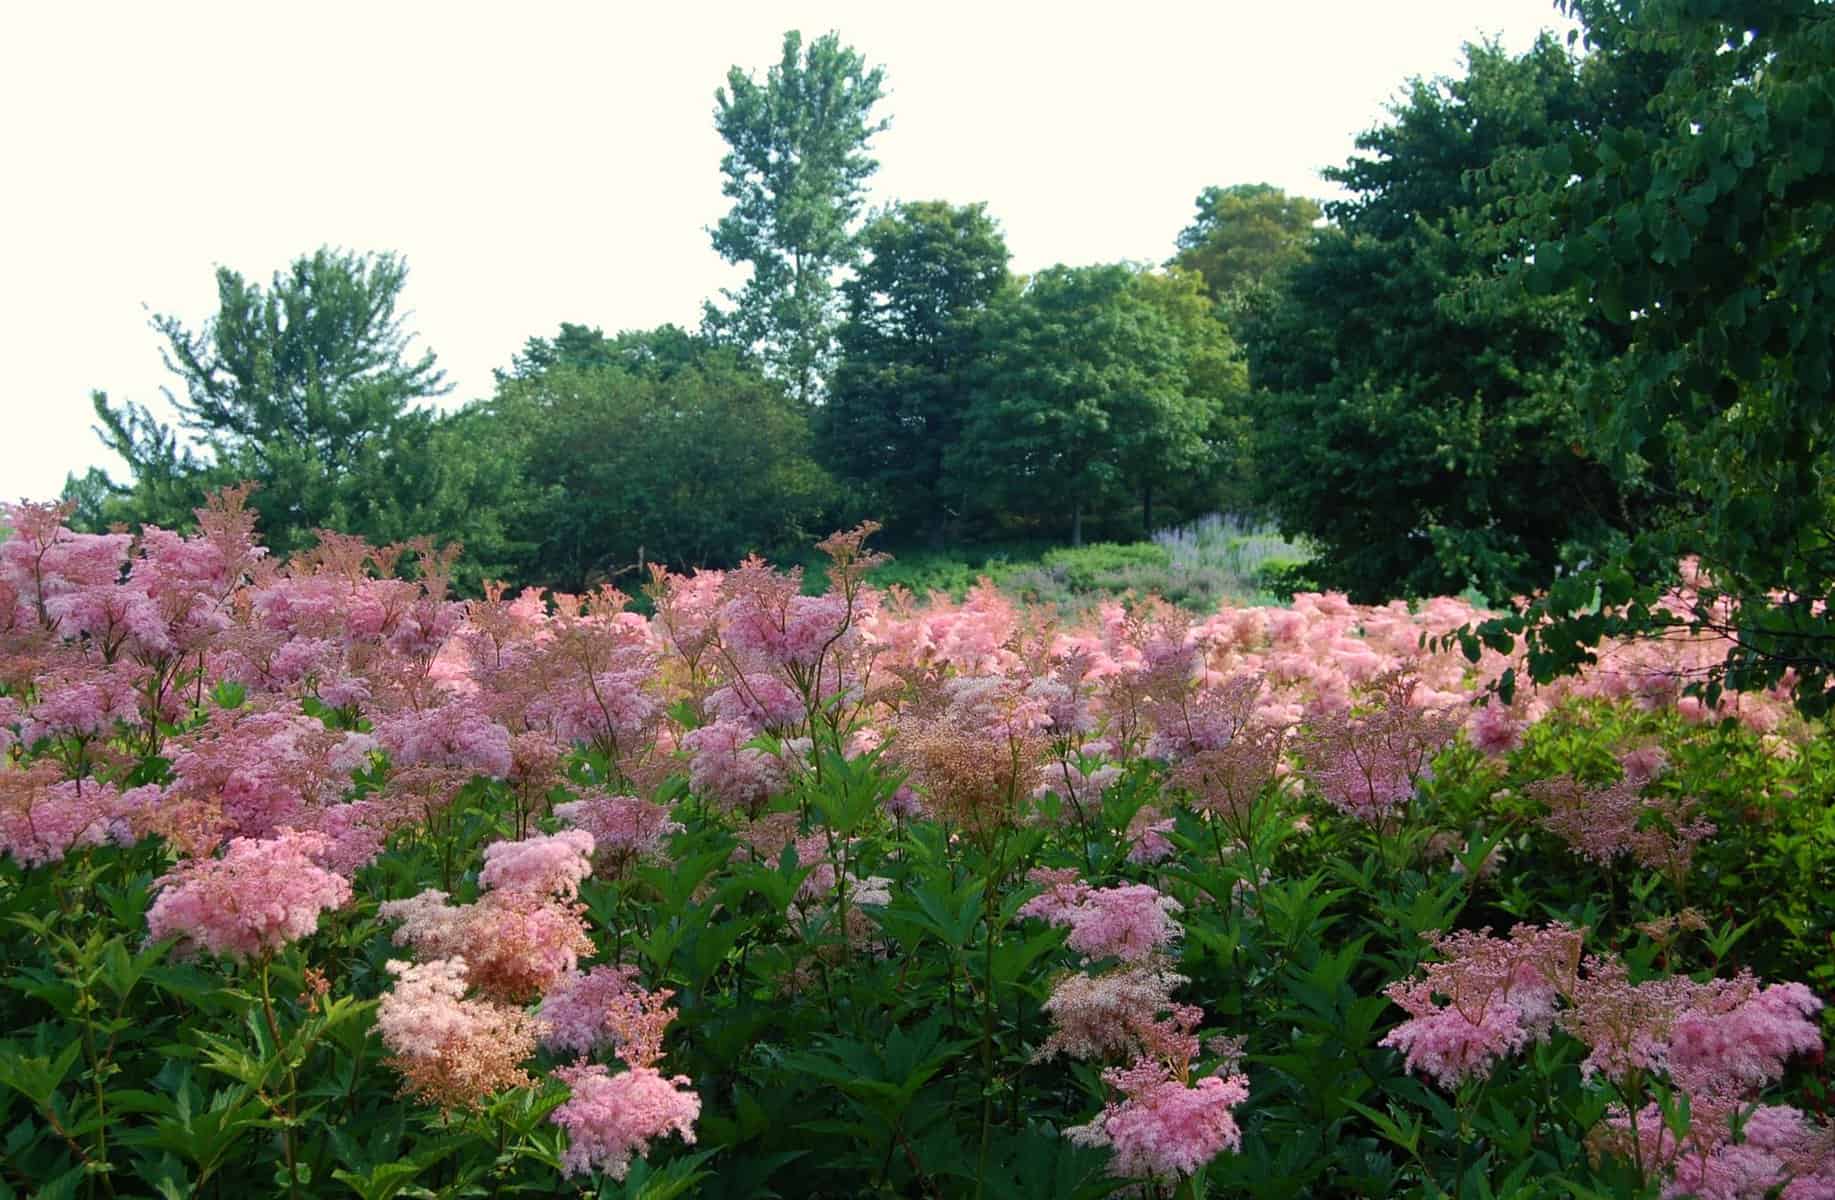 A field of pink flowers with trees in the background. Filipendula rubra